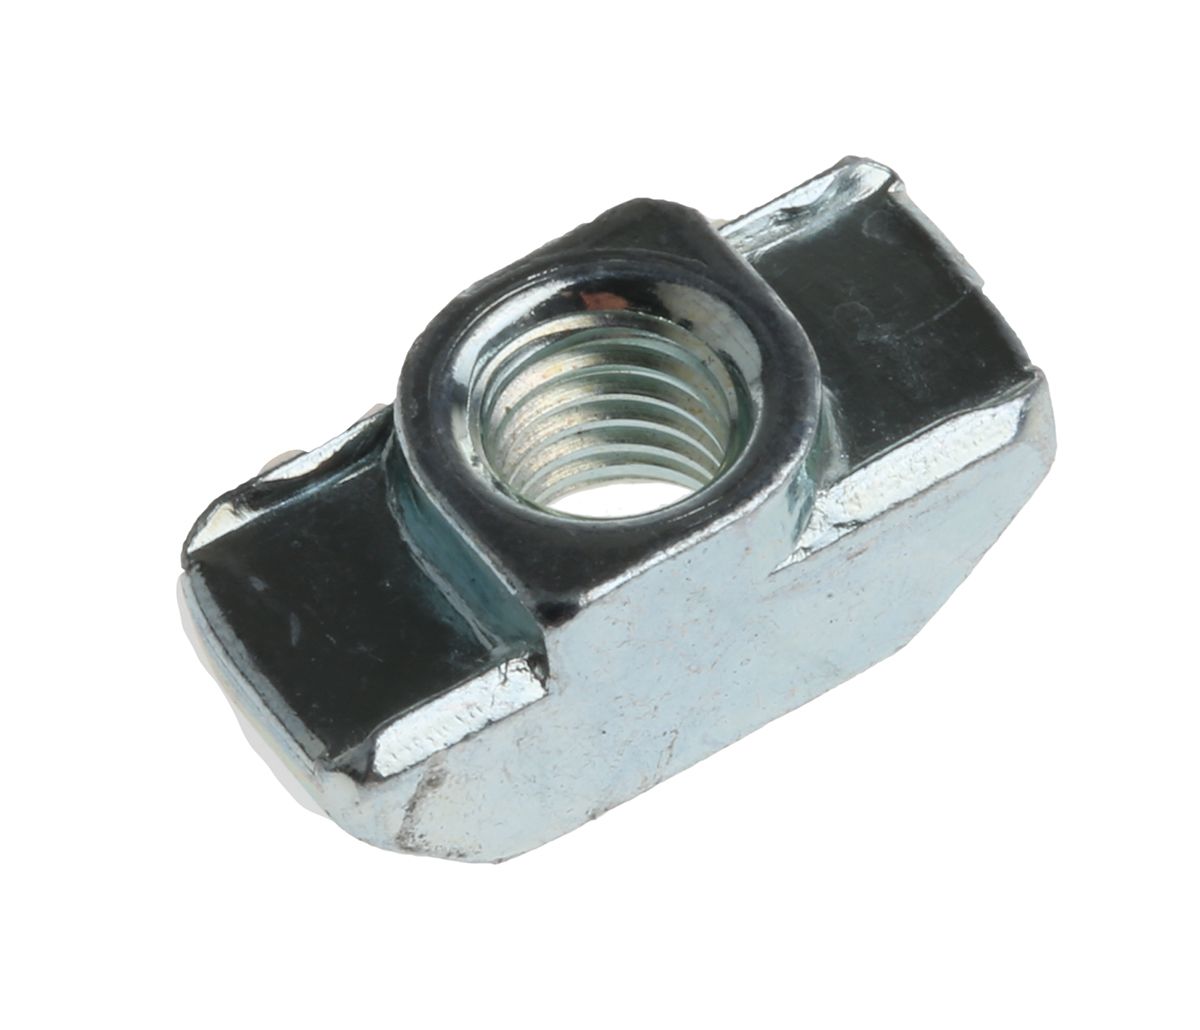 Bosch Rexroth Connecting Component, T-Slot Nut, strut profile 30 mm, groove Size 8mm